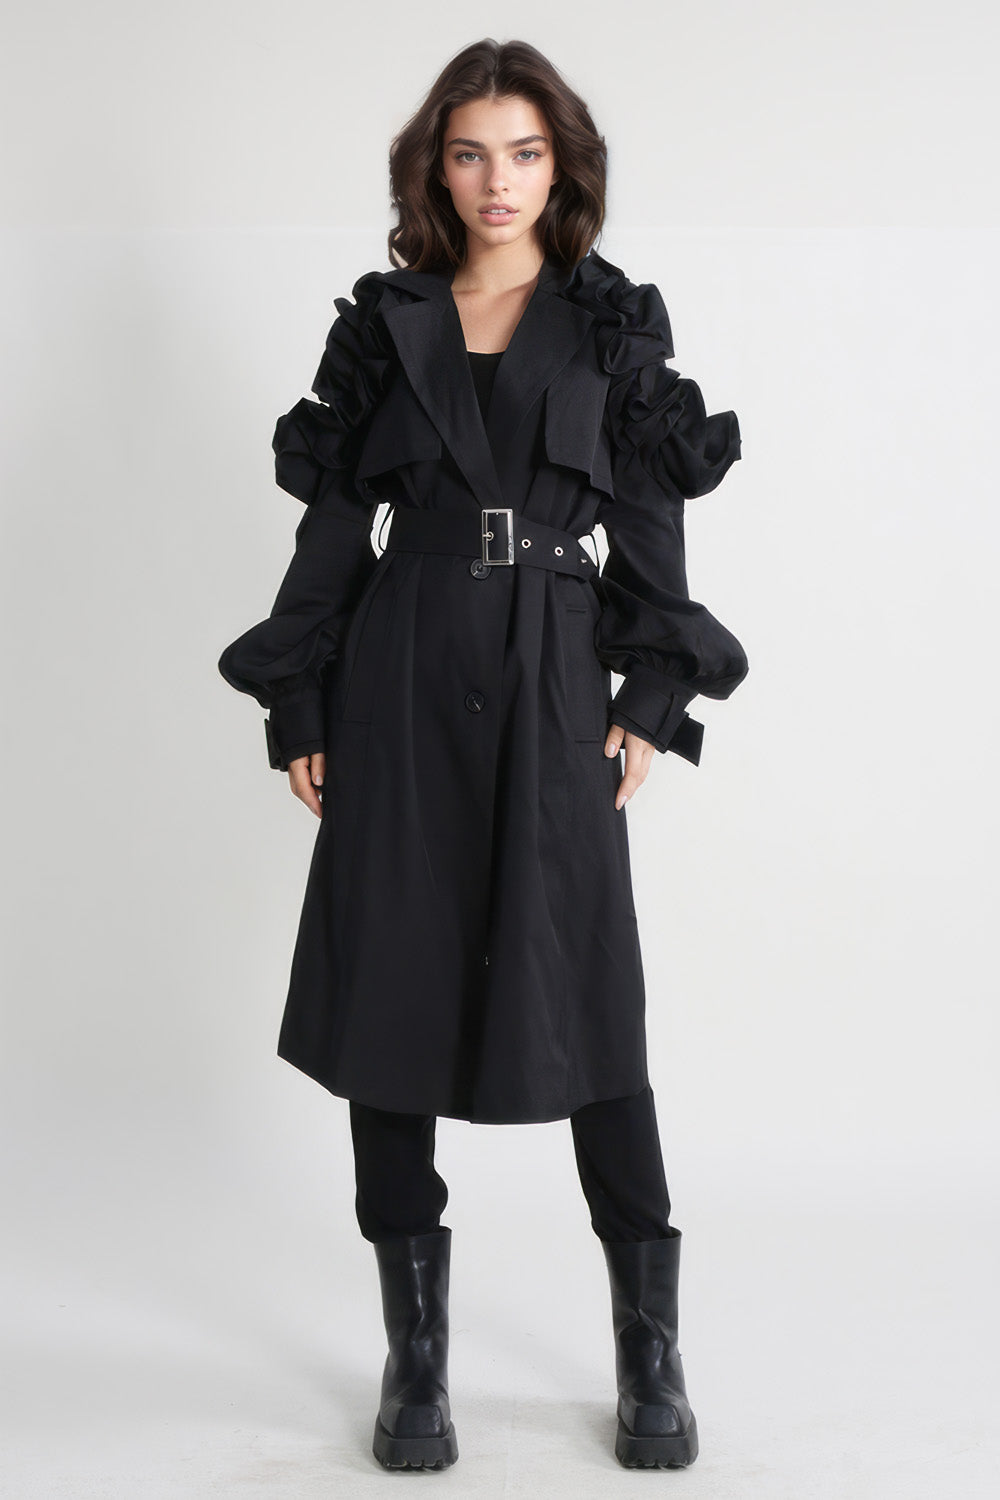 Single Breasted Trenchcoat with Sleeve Details - Black